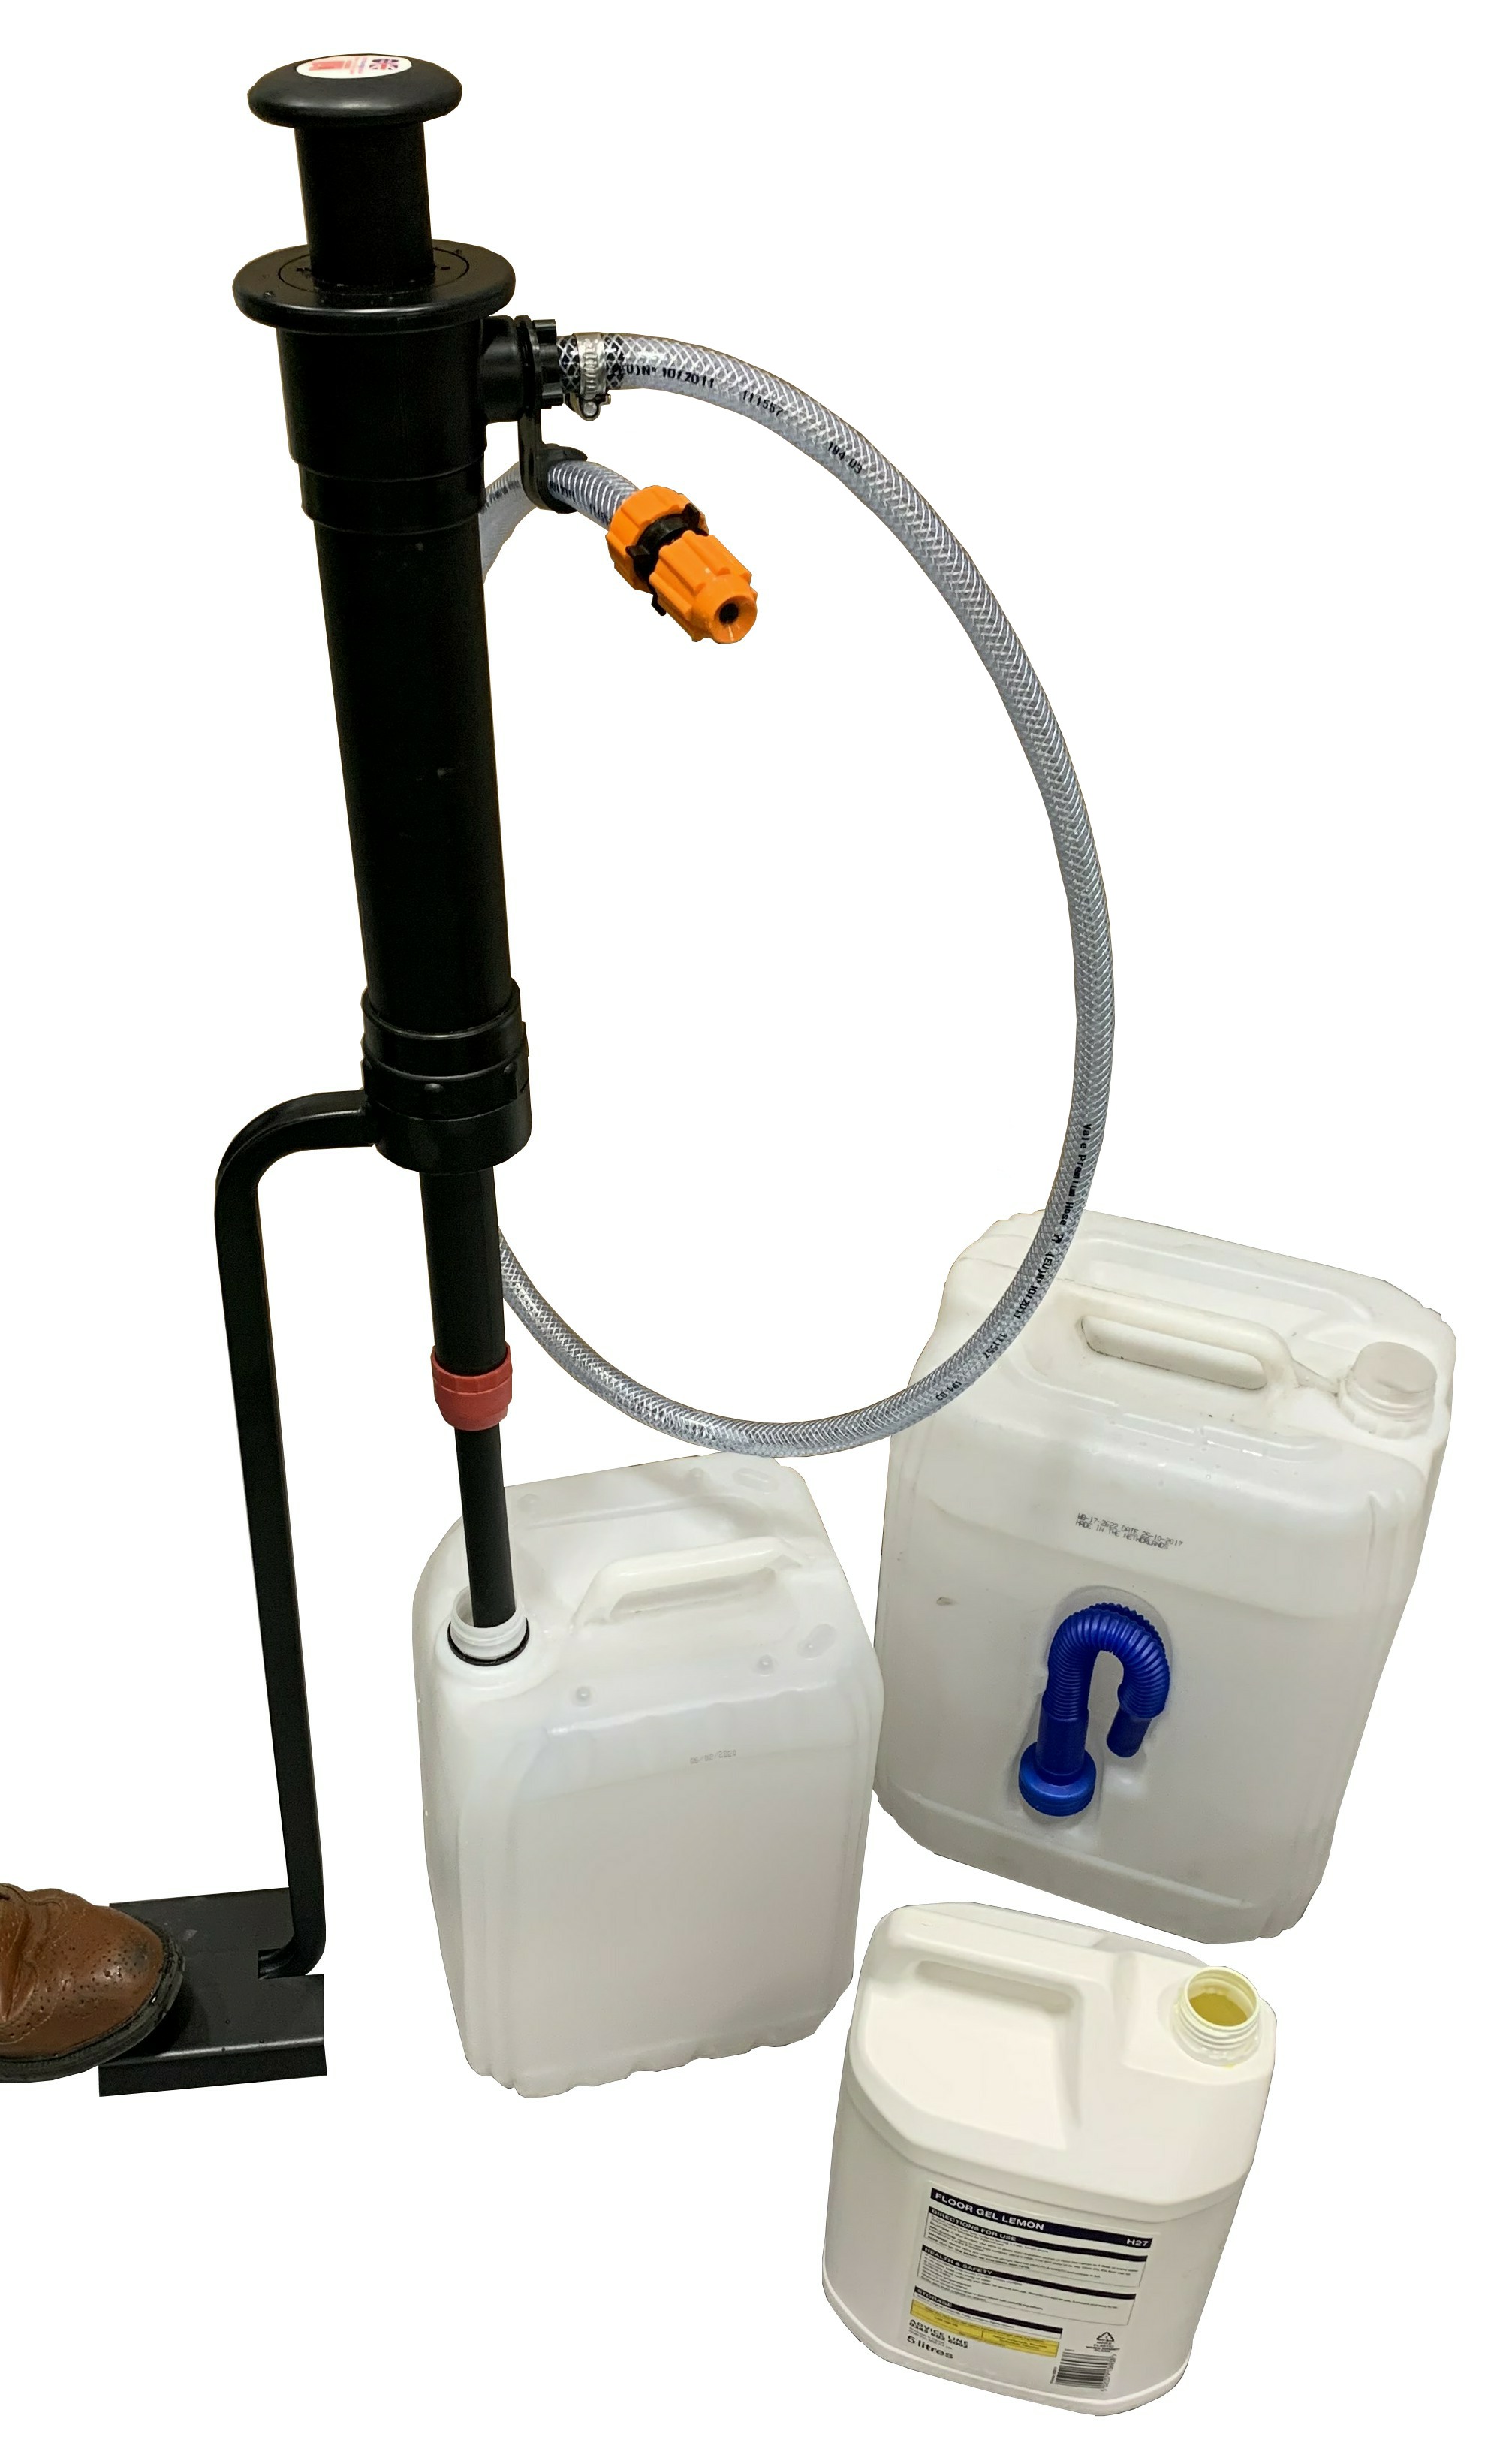 925 Disinfectant and Cleaning Multi-Purpose Stirrup Pump